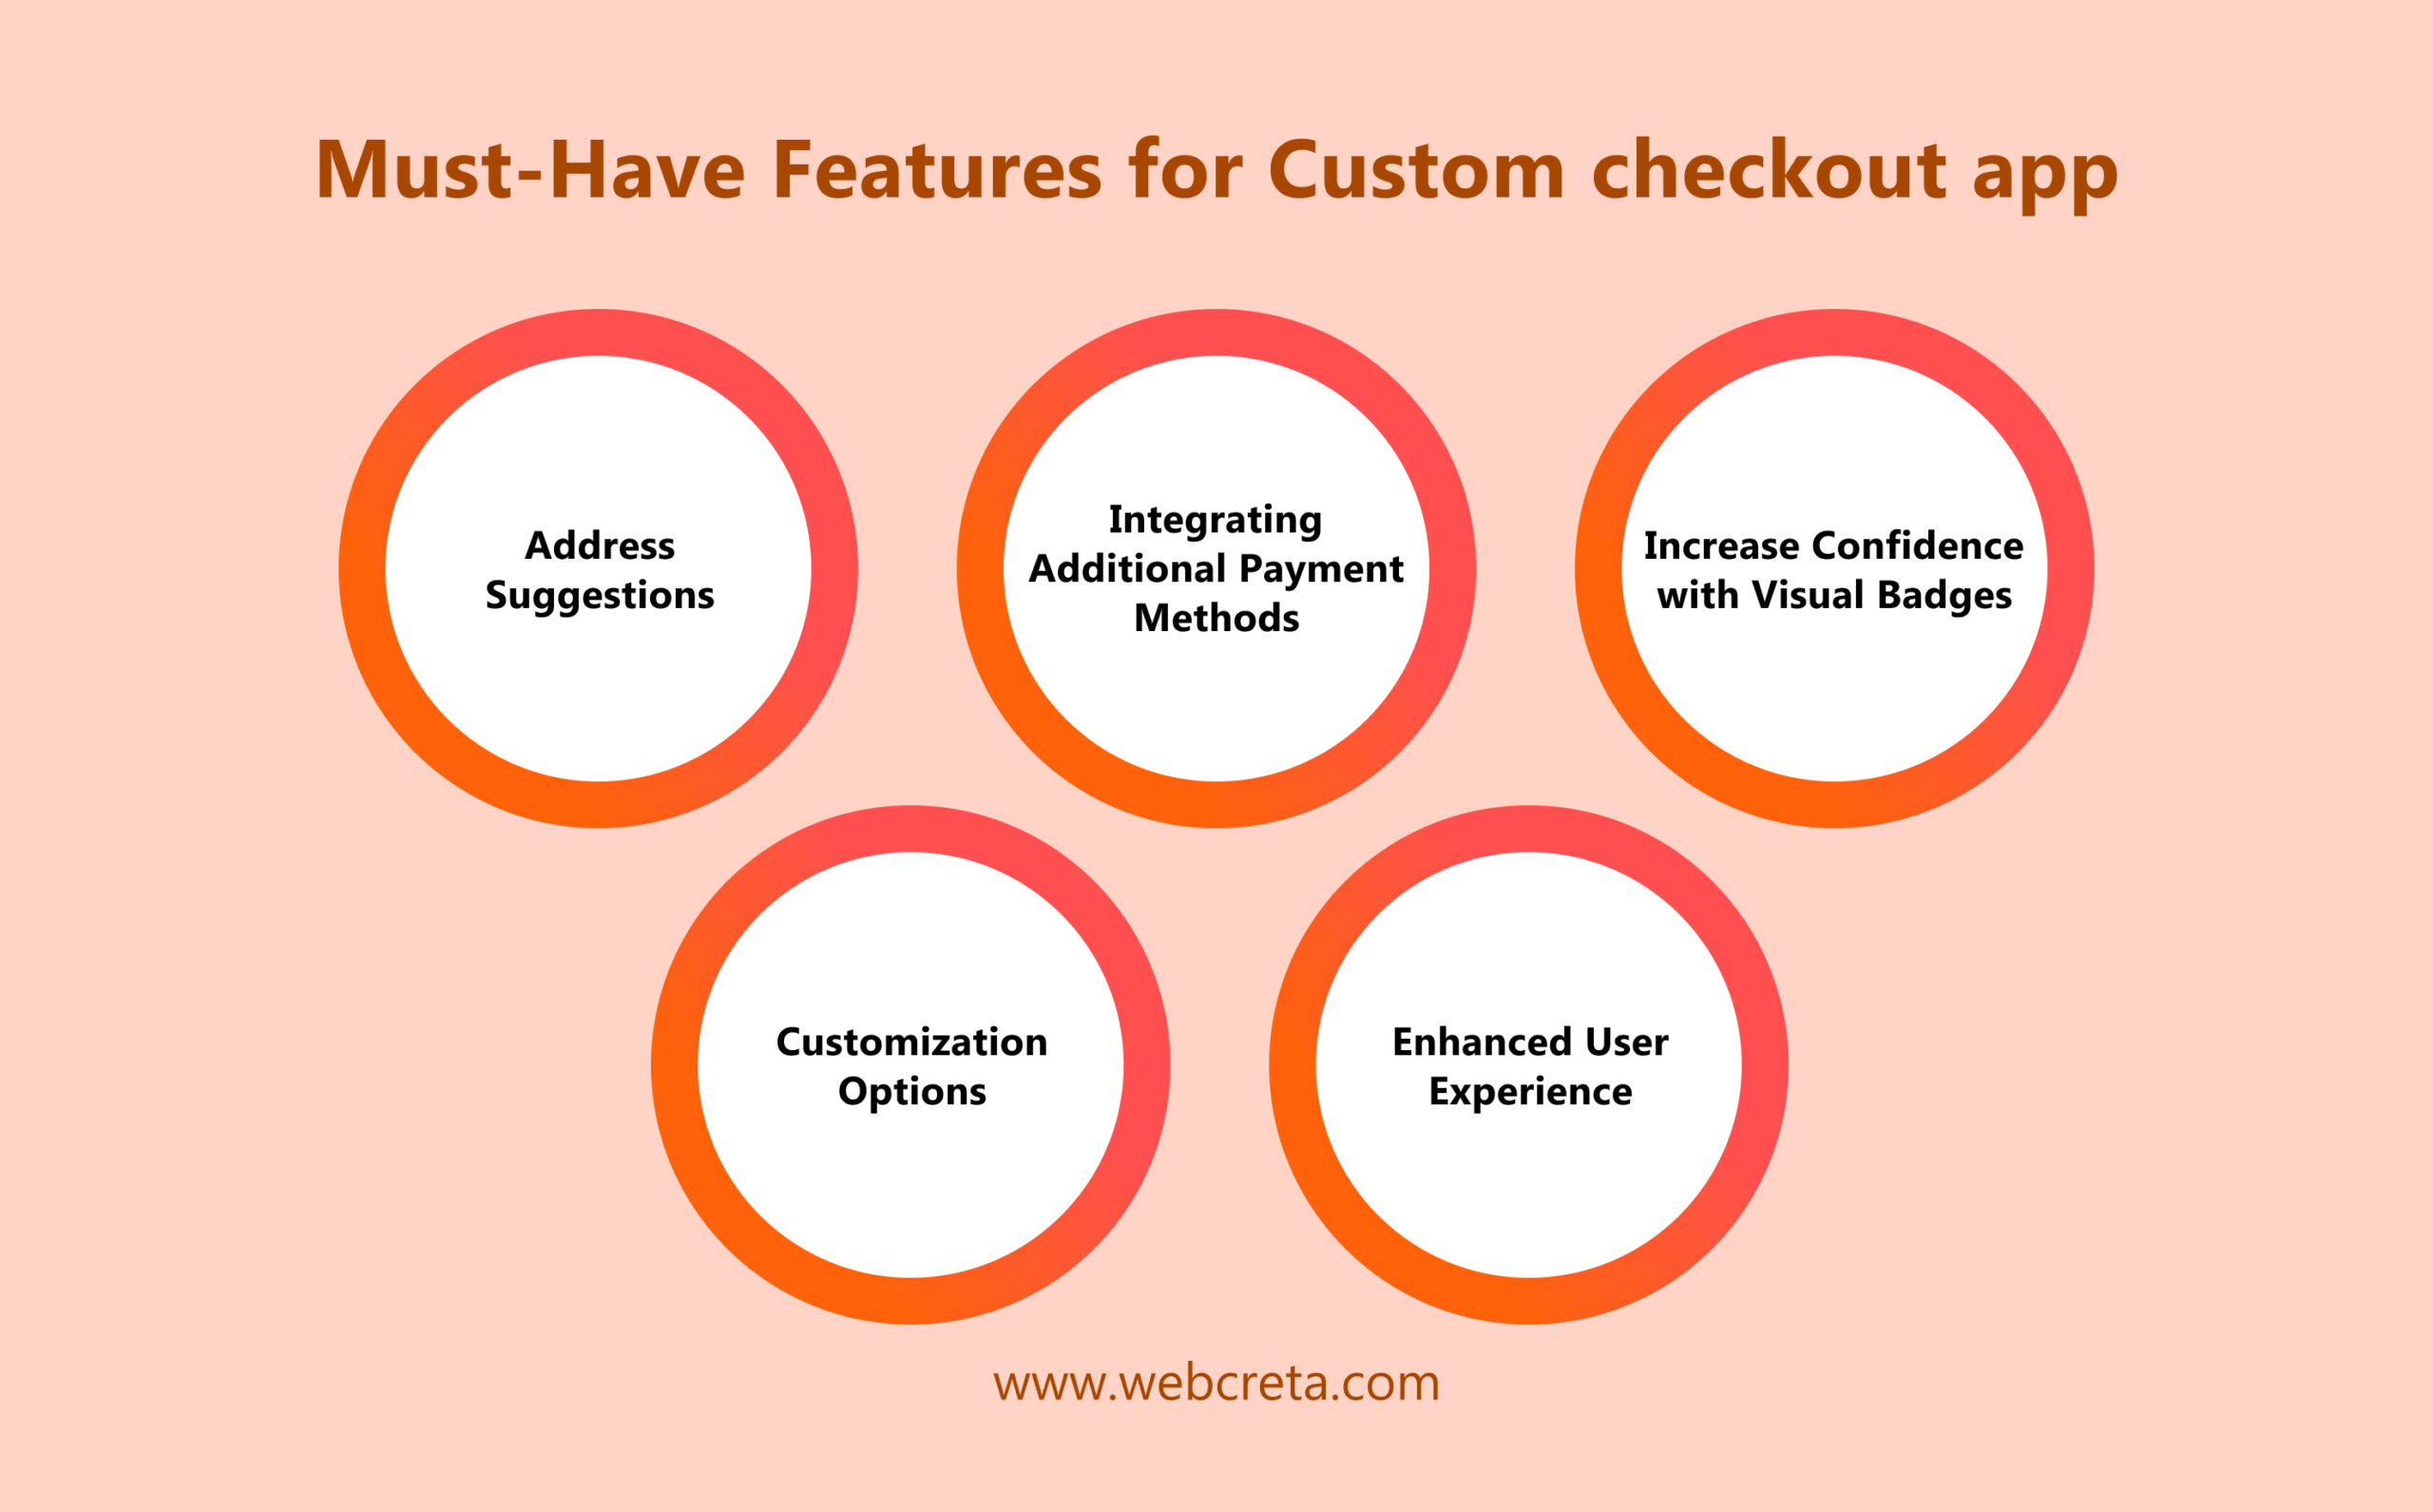 Must-Have Features for Custom checkout app